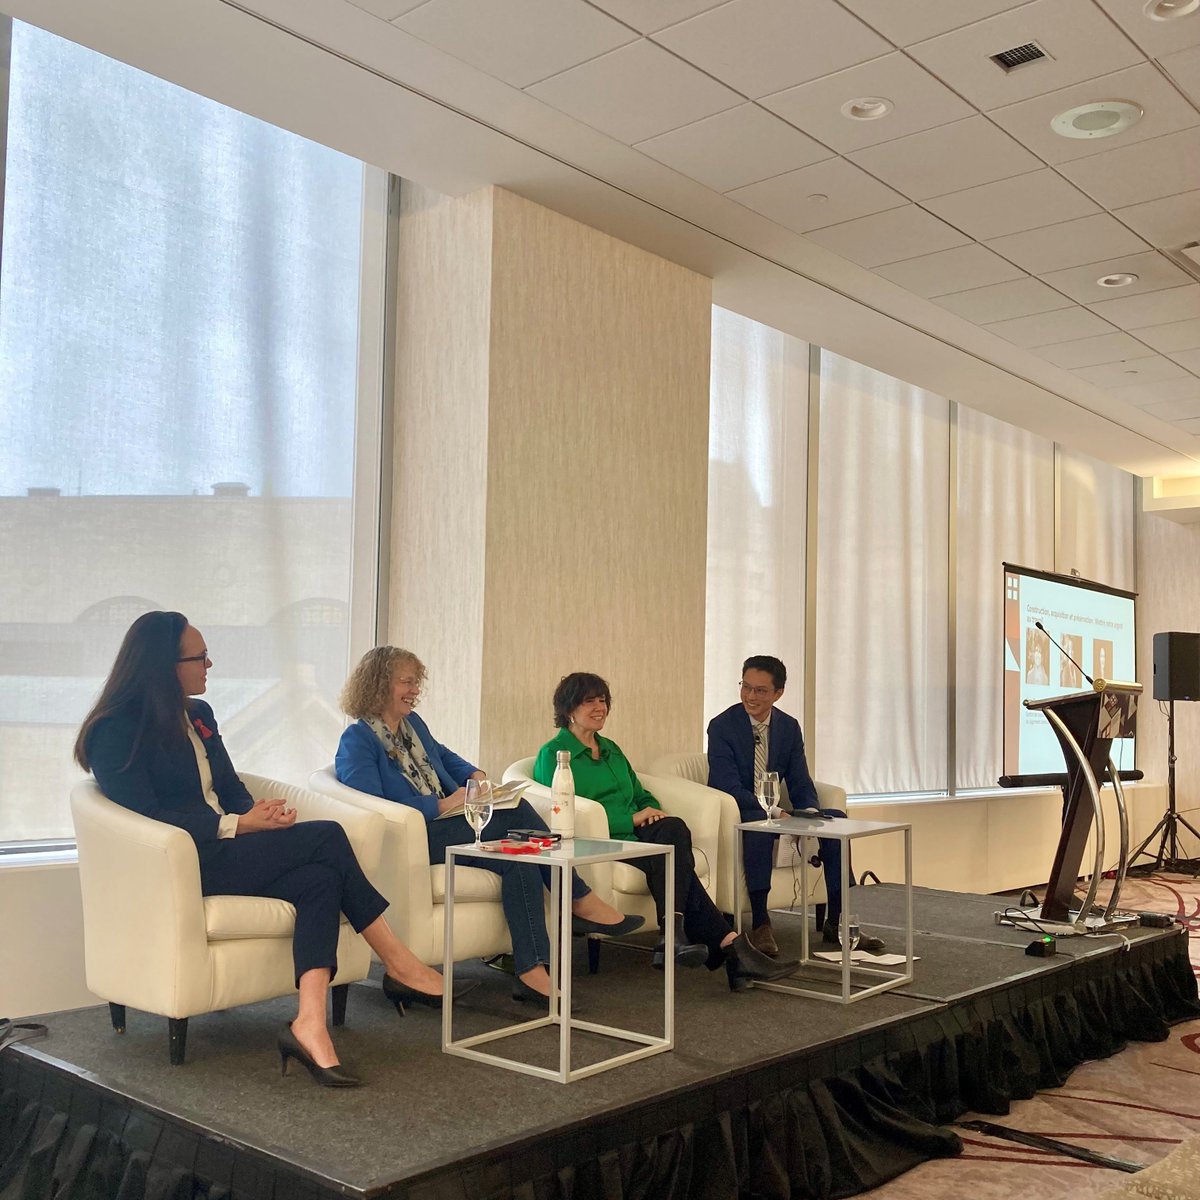 The first day of the @CMHC_ca's National Housing Conference was exciting! Our Co-Executive Director, Lisa Ker, spoke as part of a panel about the triple bottom line & how financial leverage can change the scale of intervention in the sector. #CloseTheGap #NHC #NHC24